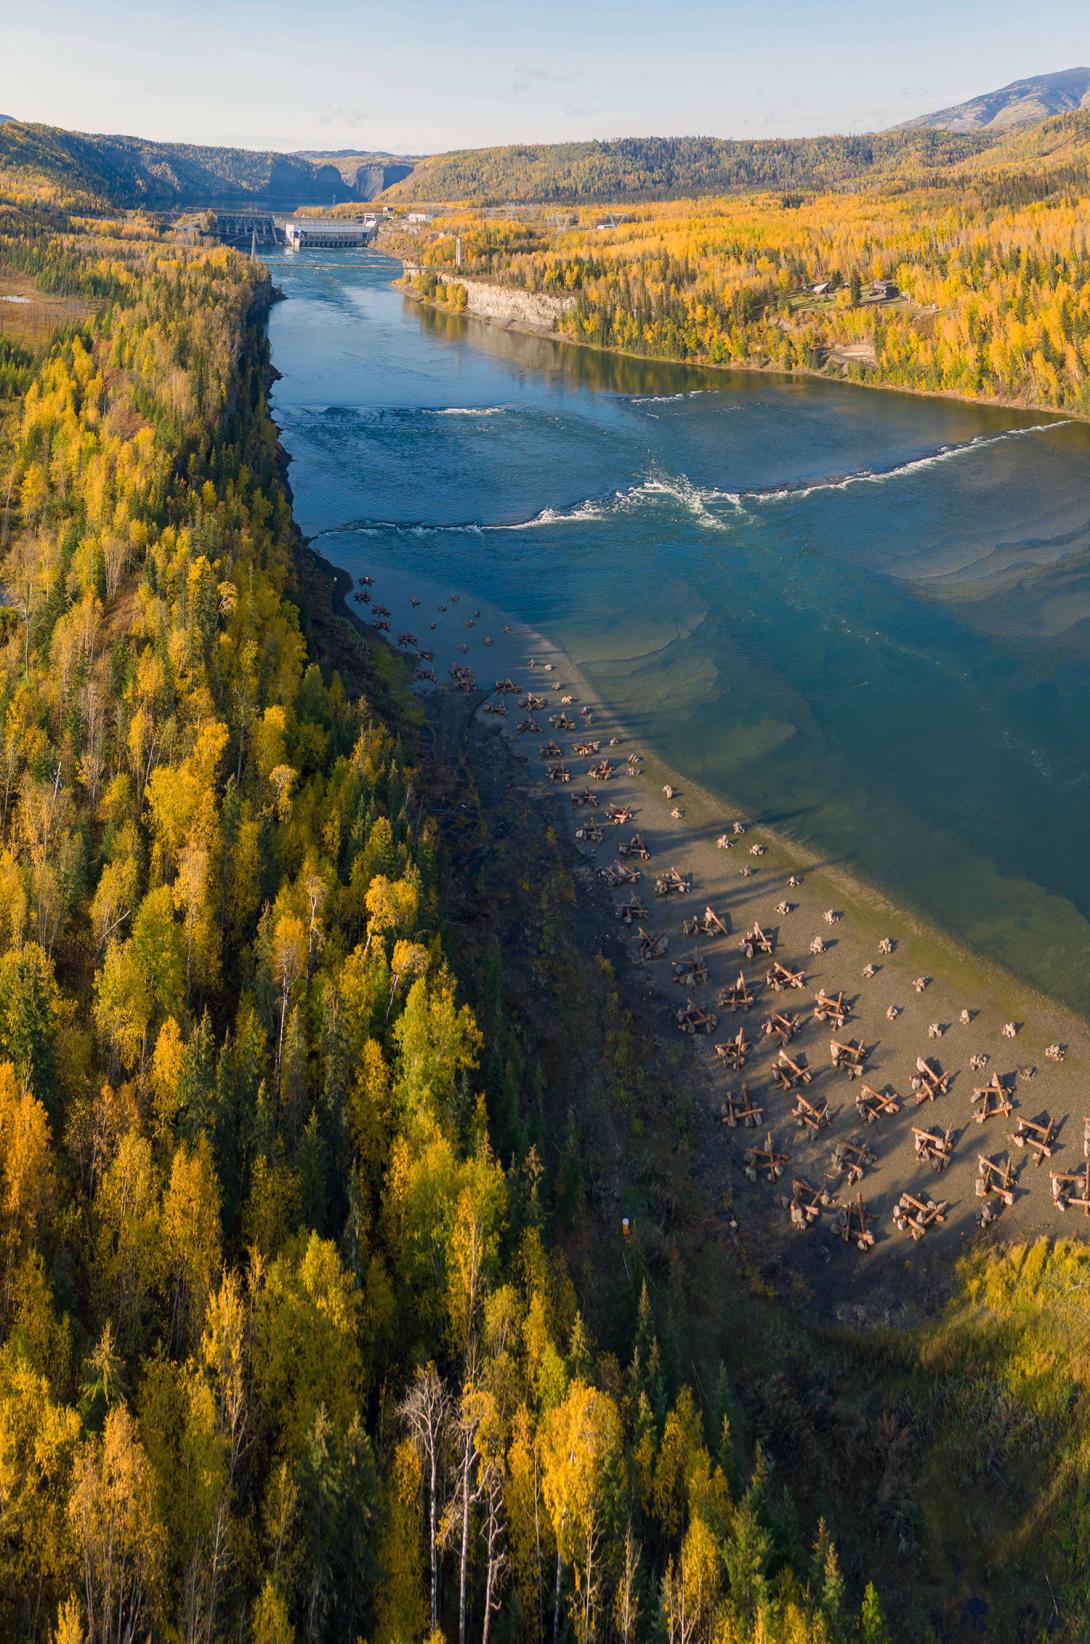 Work on the Maurice Creek spawning shoal is complete, as viewed downstream of the Peace Canyon Dam. ! September 2022